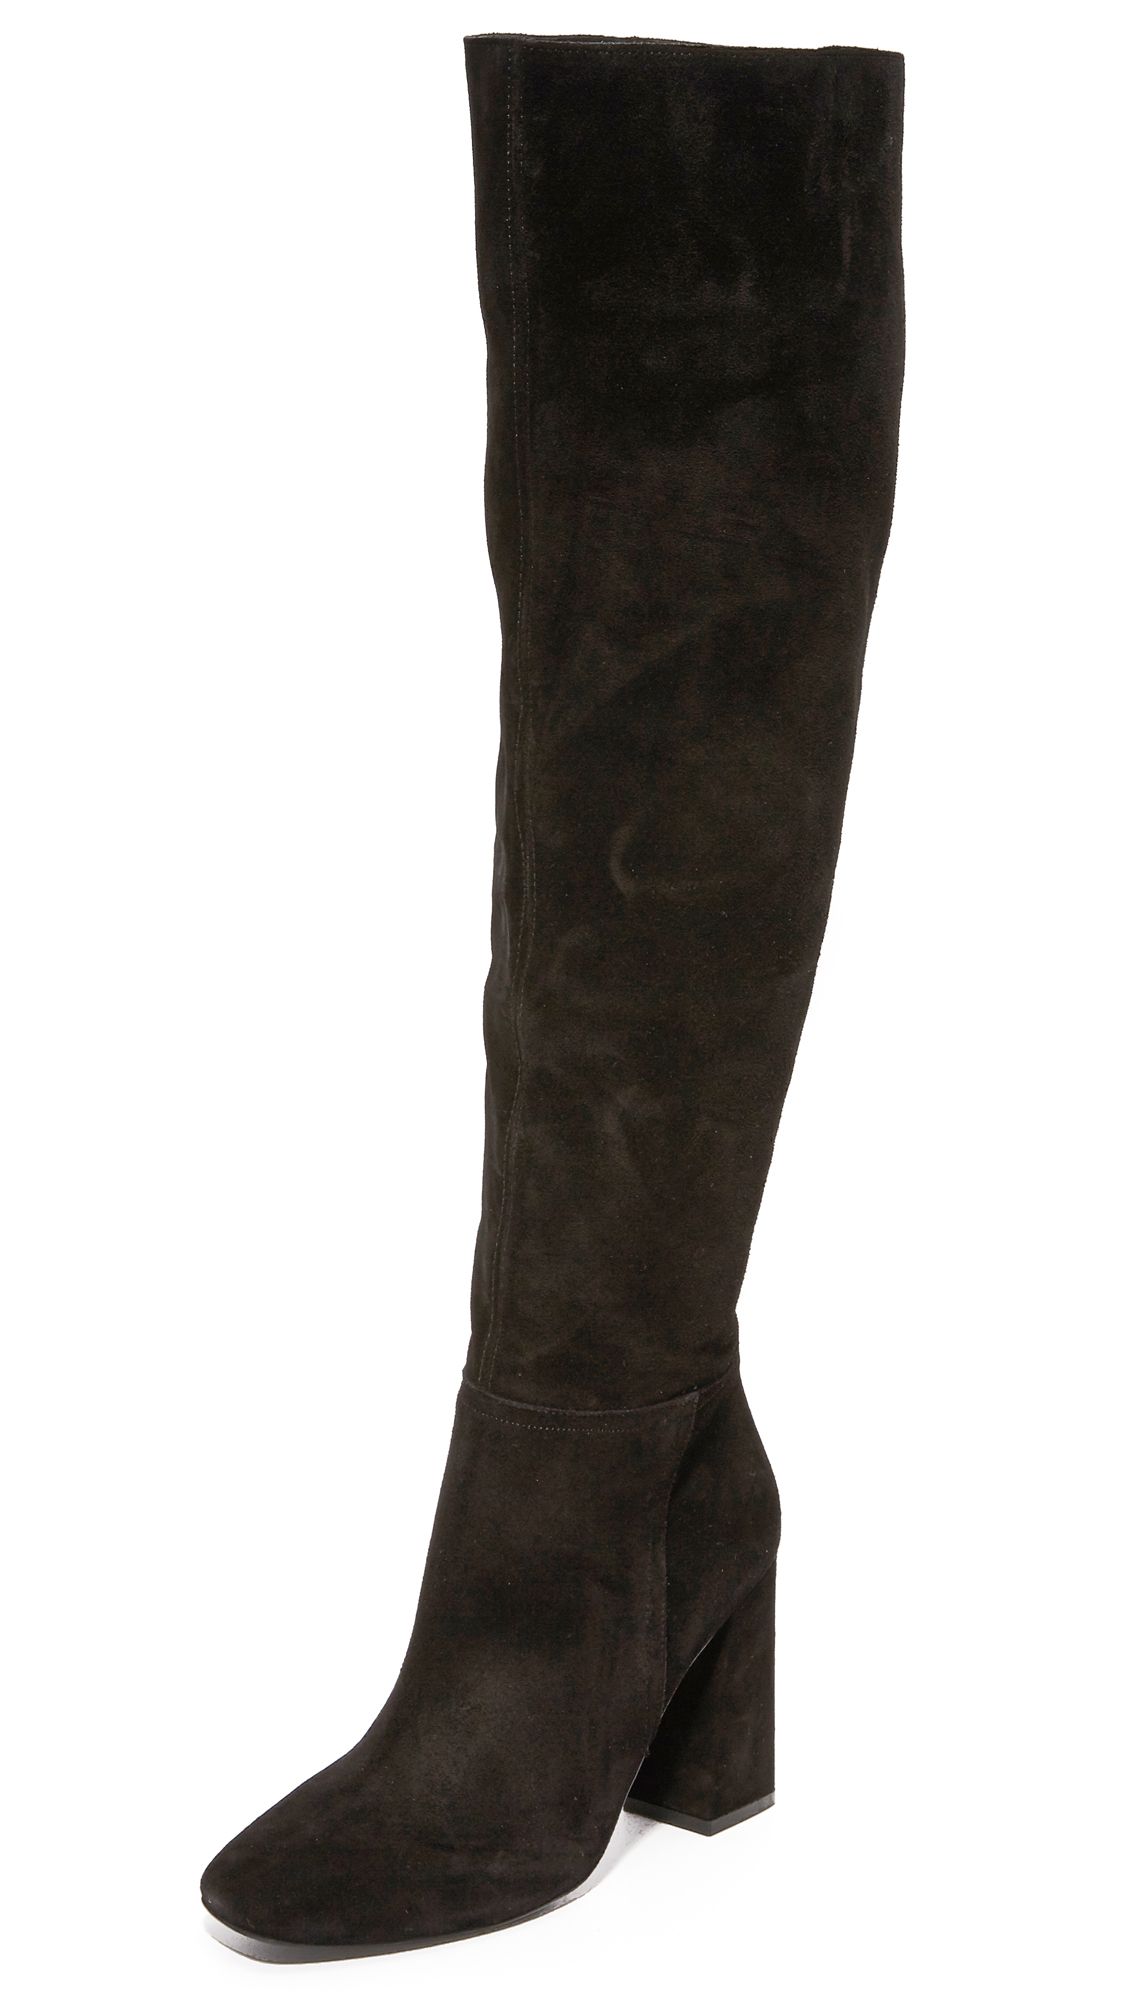 Free People Liberty Over The Knee Boots - Black | Shopbop